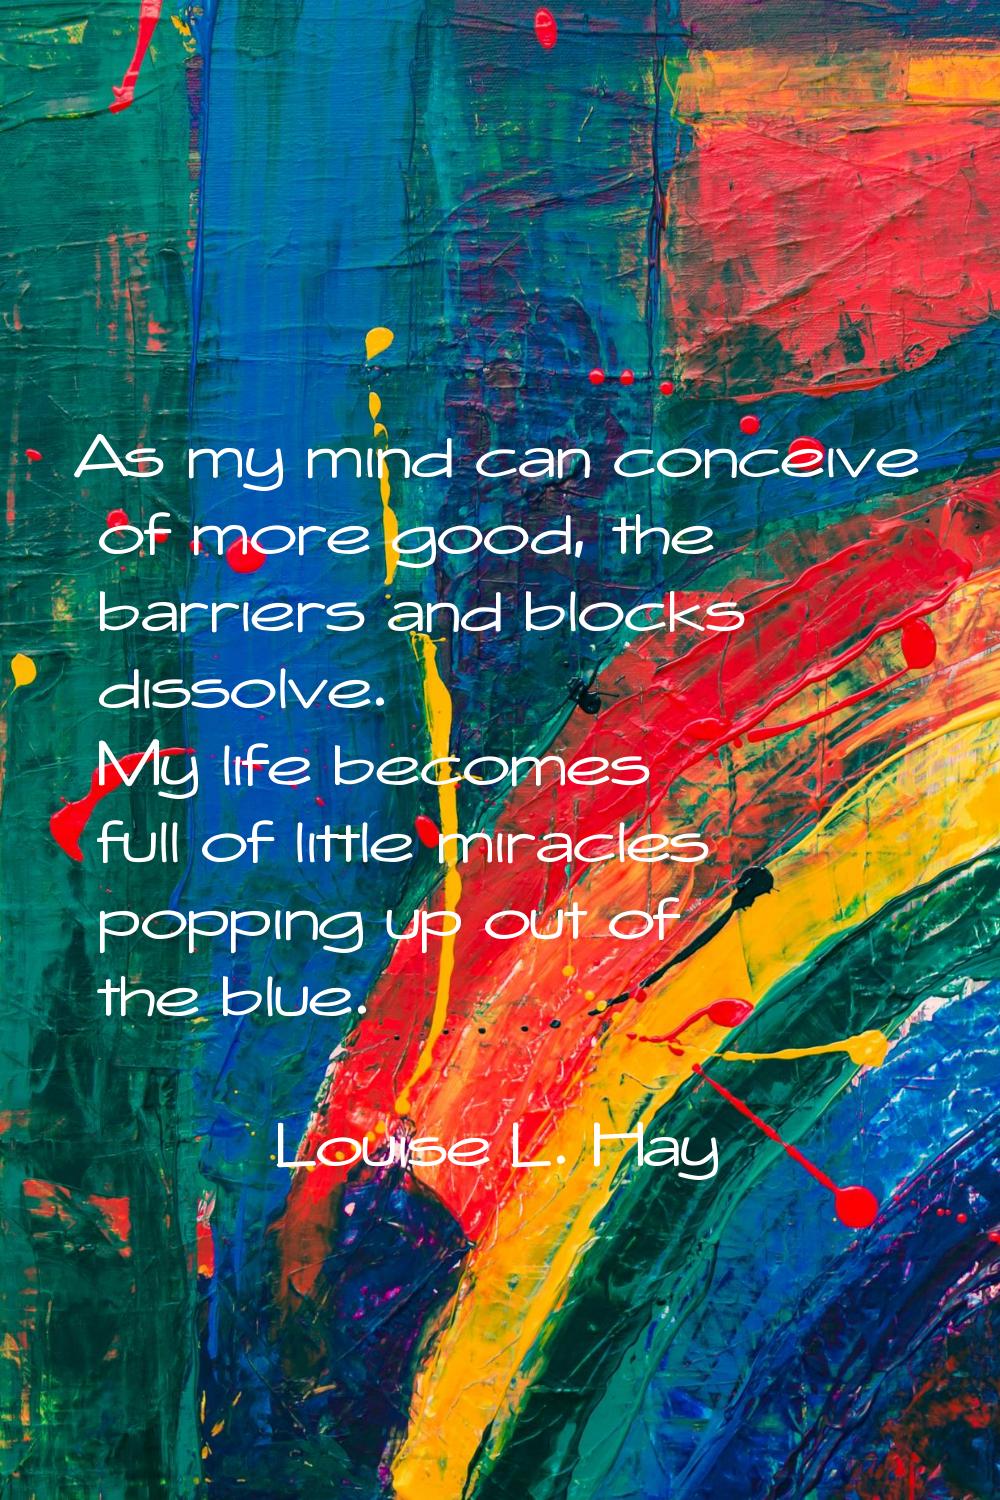 As my mind can conceive of more good, the barriers and blocks dissolve. My life becomes full of lit